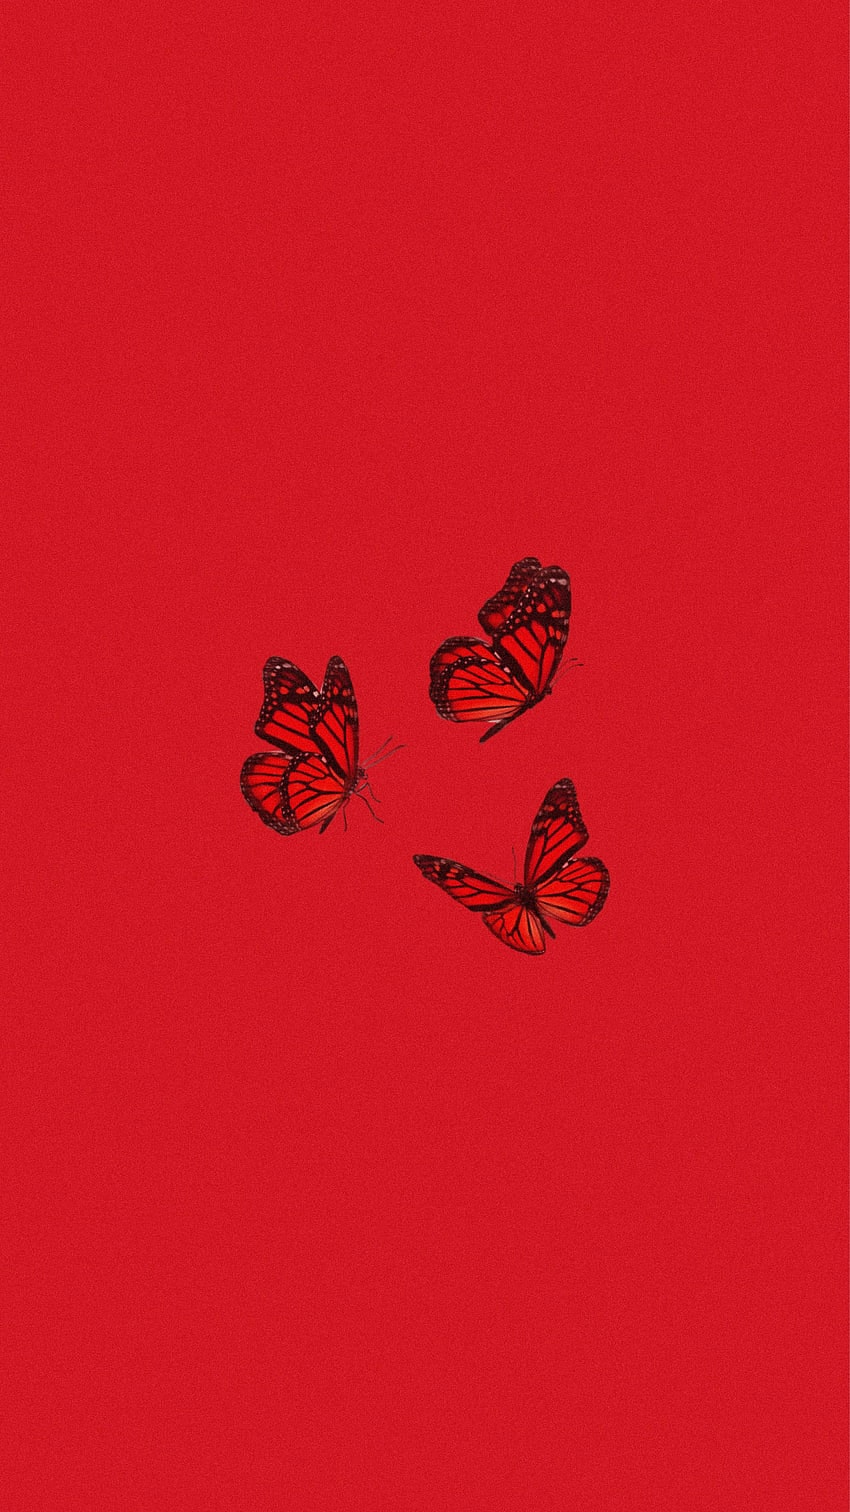 Red Iphone Wallpaper - NawPic